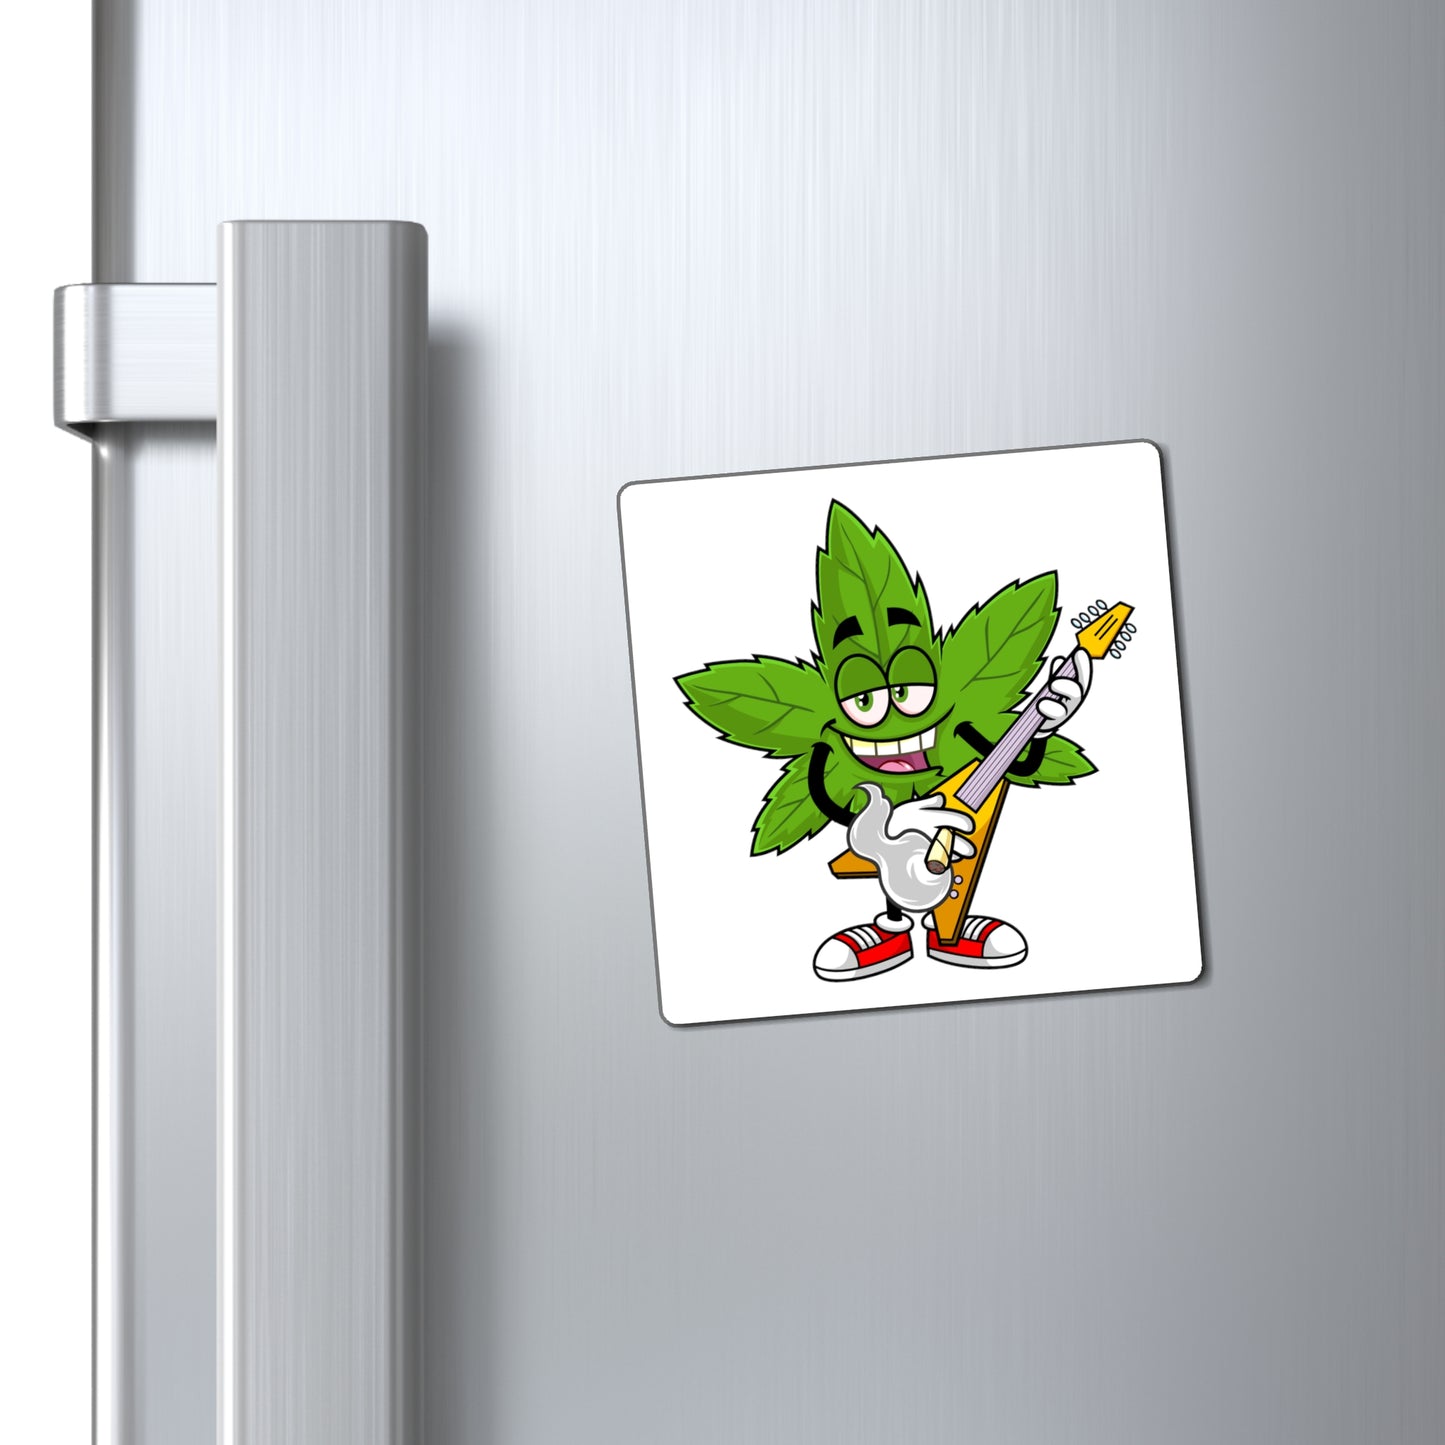 Marijuana Reggae Pot Leaf Man Smoking A Joint With Red Sneakers Playing Guitar Style 4 Magnets